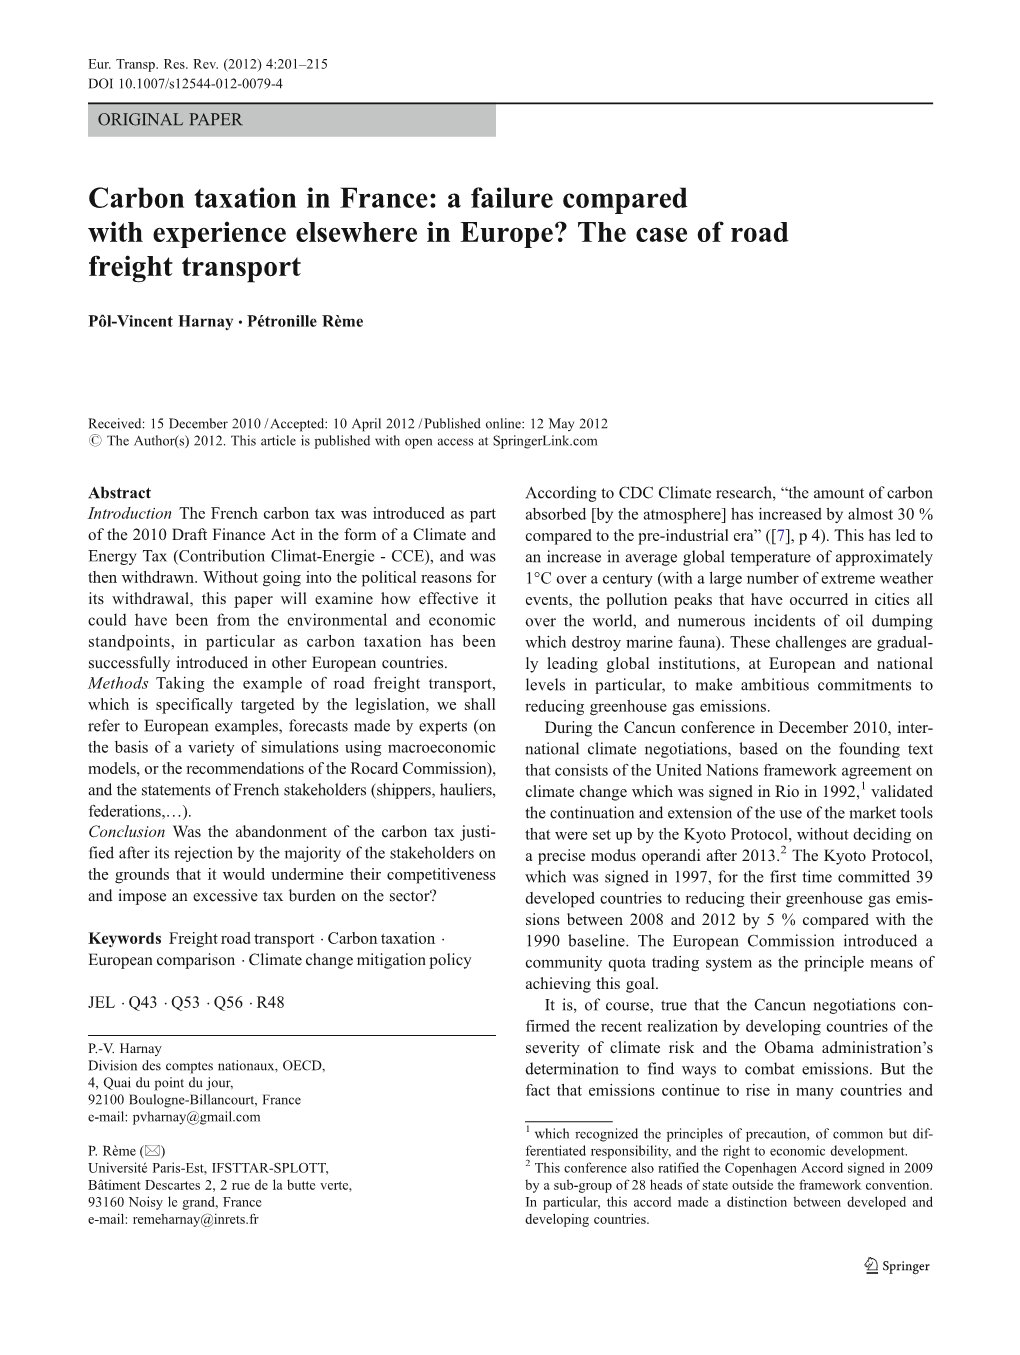 Carbon Taxation in France: a Failure Compared with Experience Elsewhere in Europe? the Case of Road Freight Transport